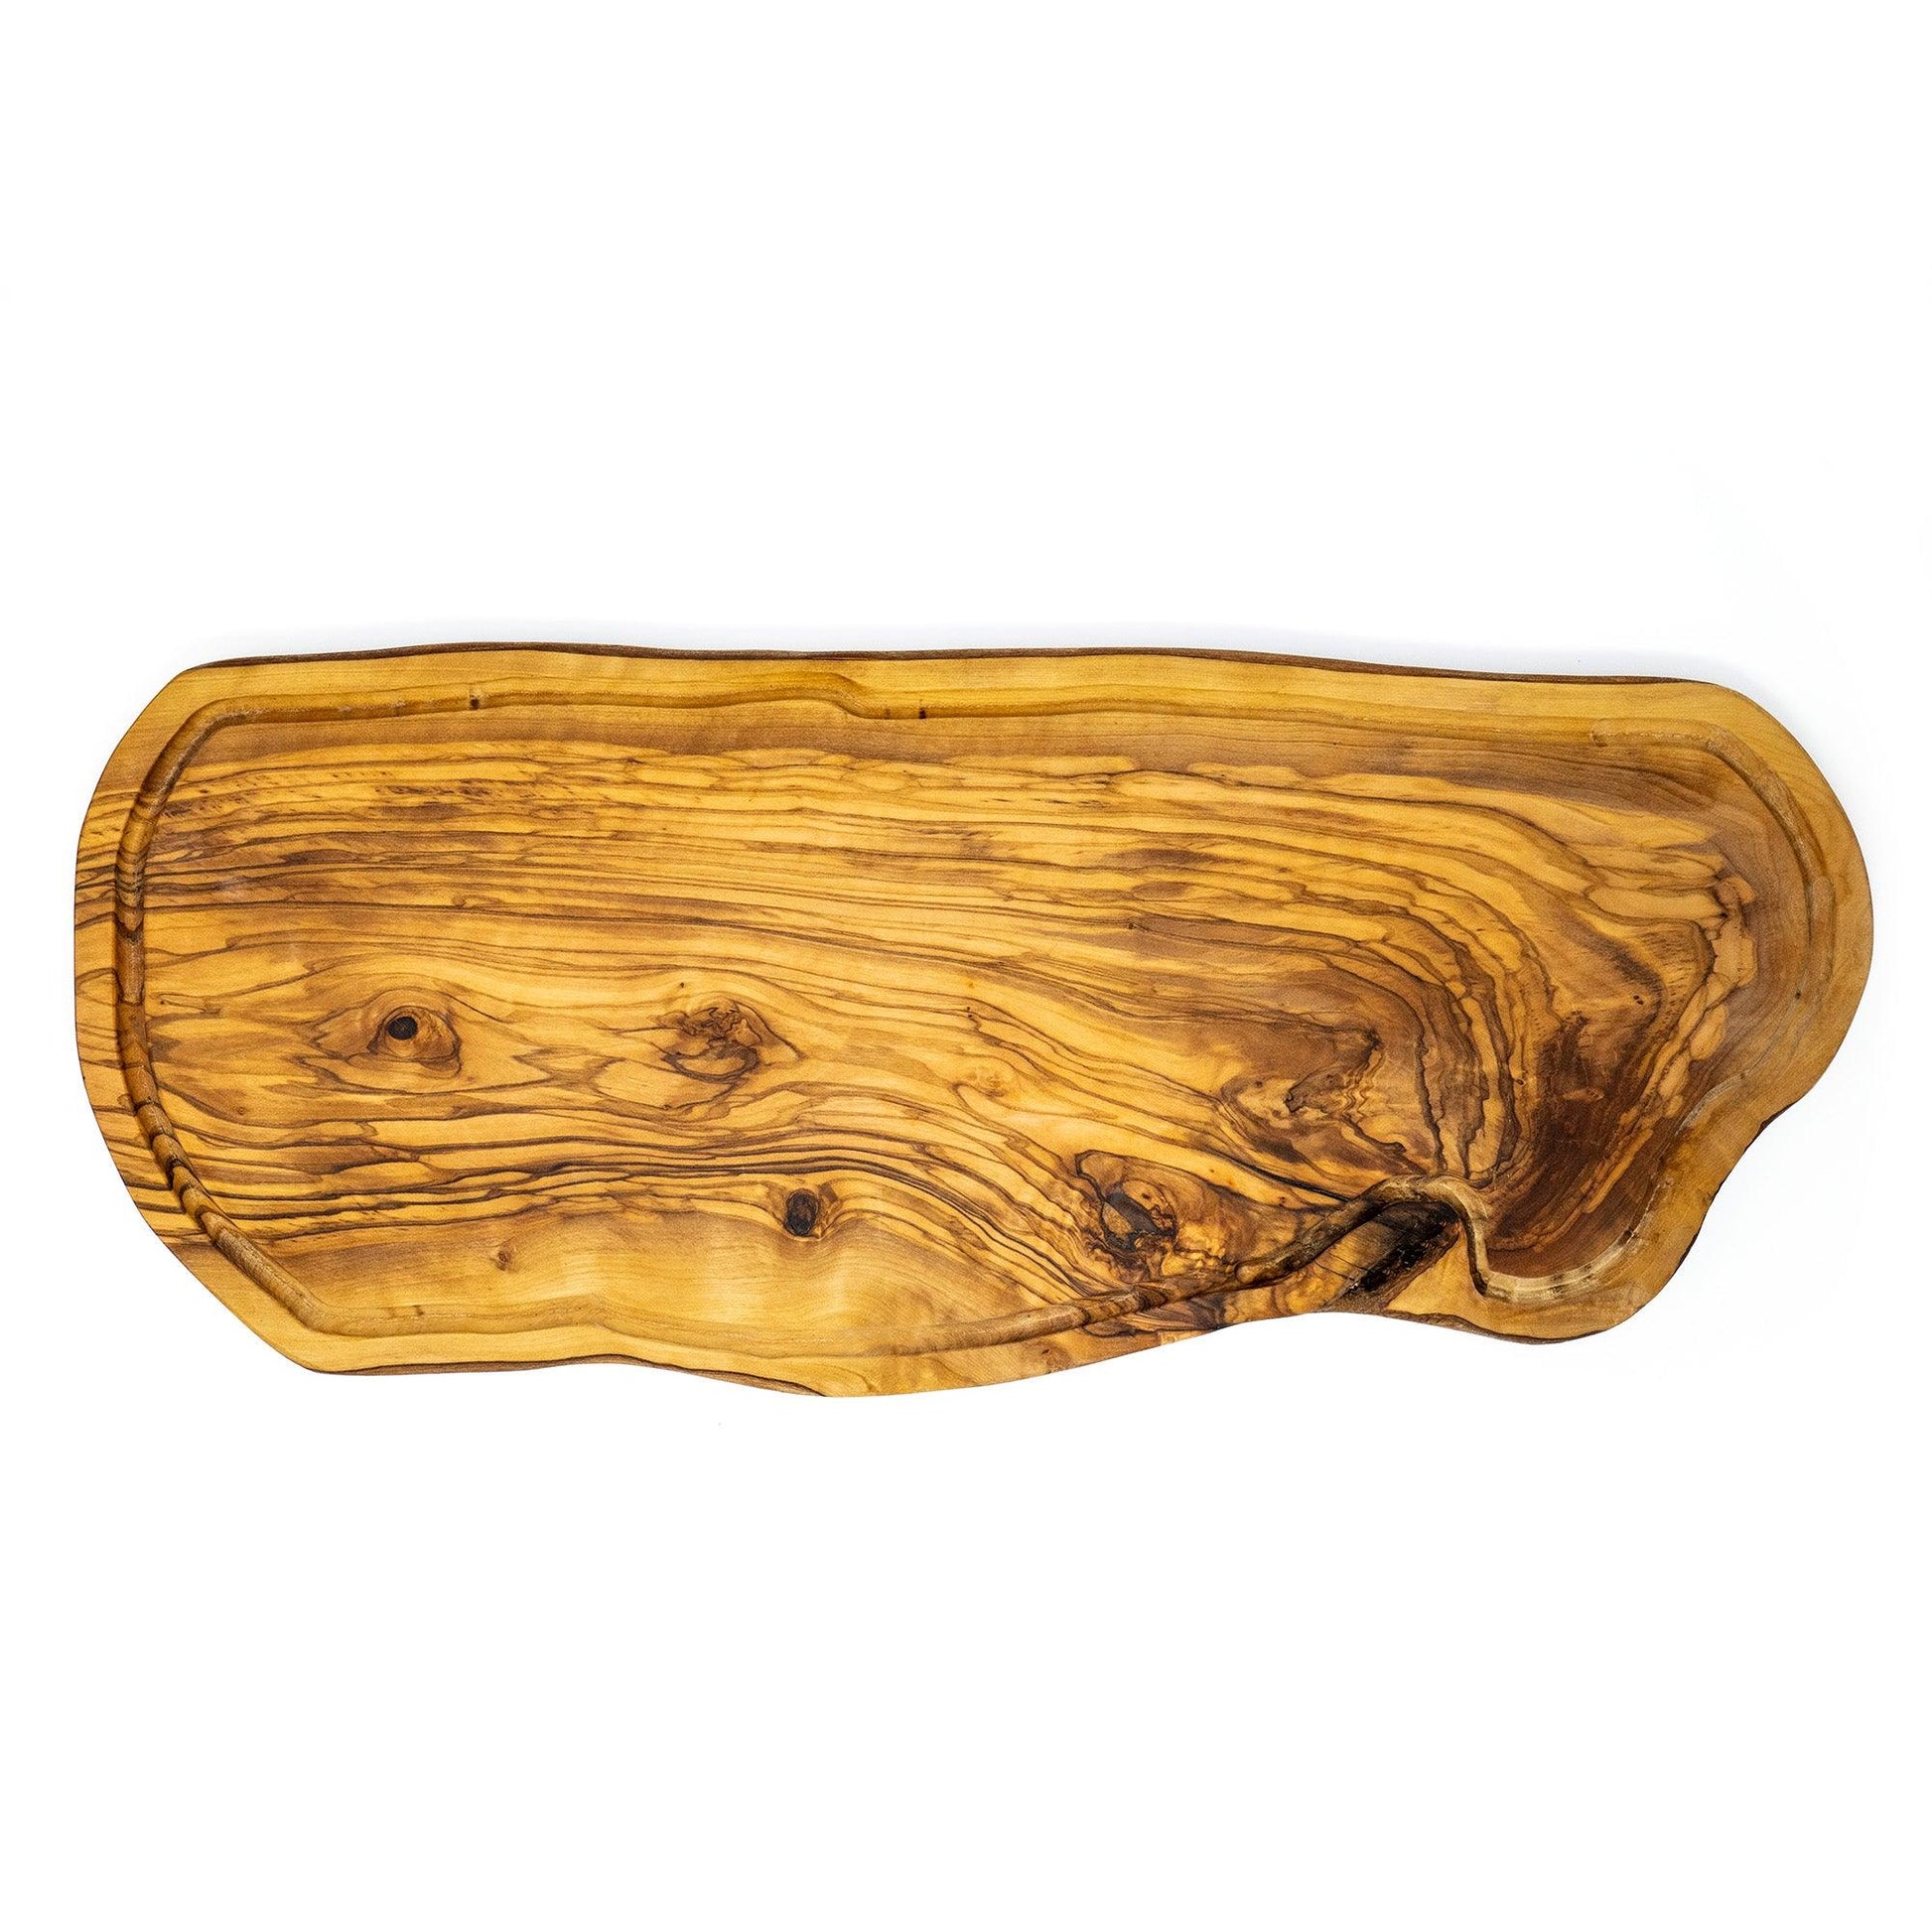 Small Round Wood Cutting Board with Juice Groove